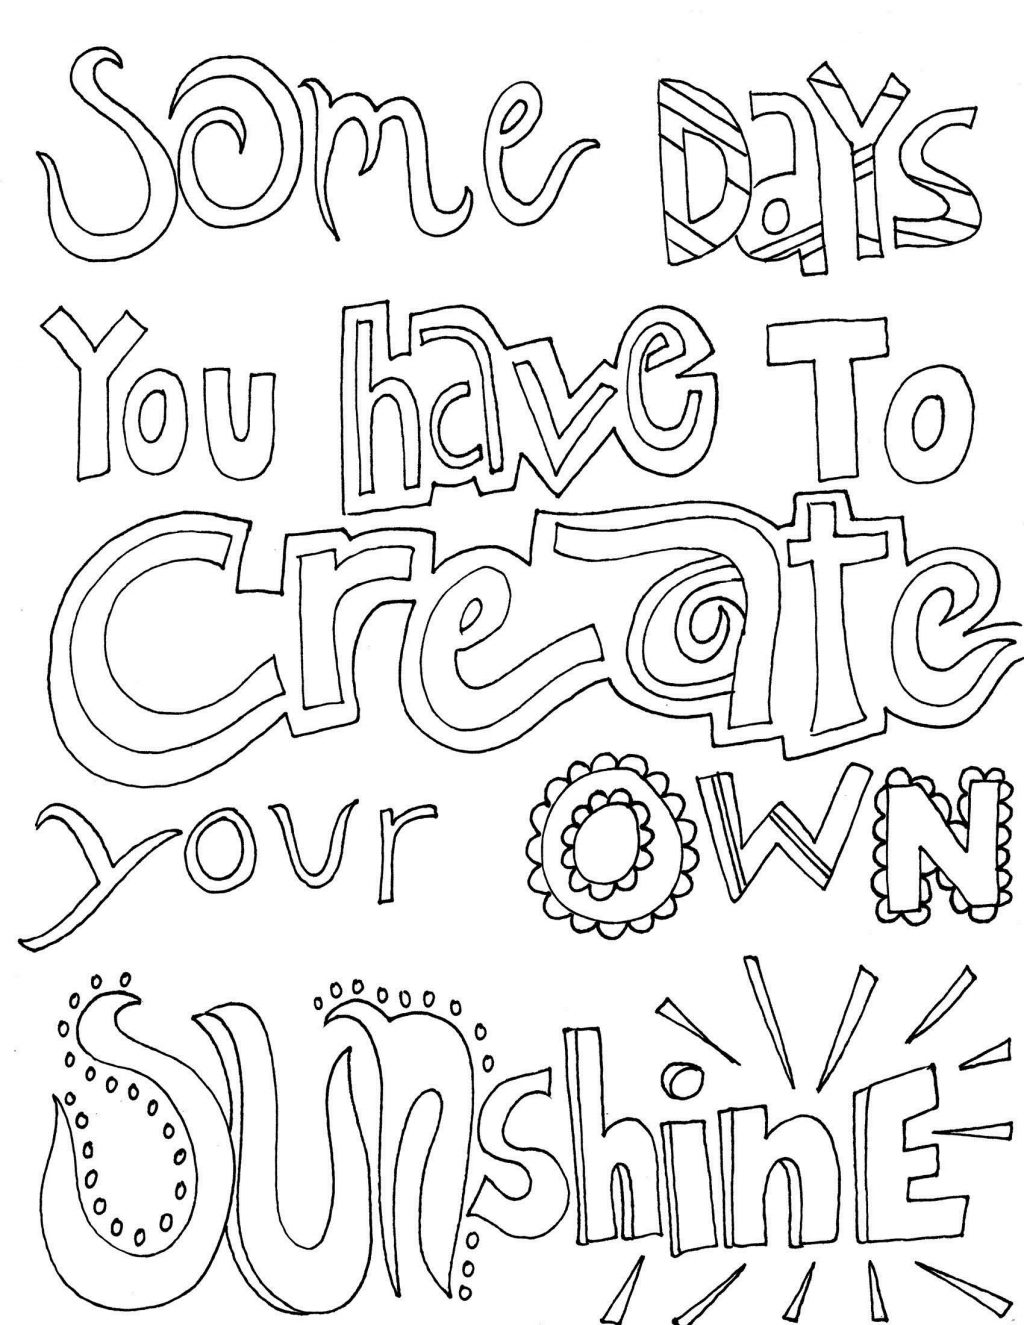 Quotes ~ Coloring Sheet Outstanding Pages Inspirational Quotes Photo  Inspirations Free For Kids Women Funny About Approachingtheelephant  Positive Amazing Image Amazing Free Positive Quotes Image Ideas.